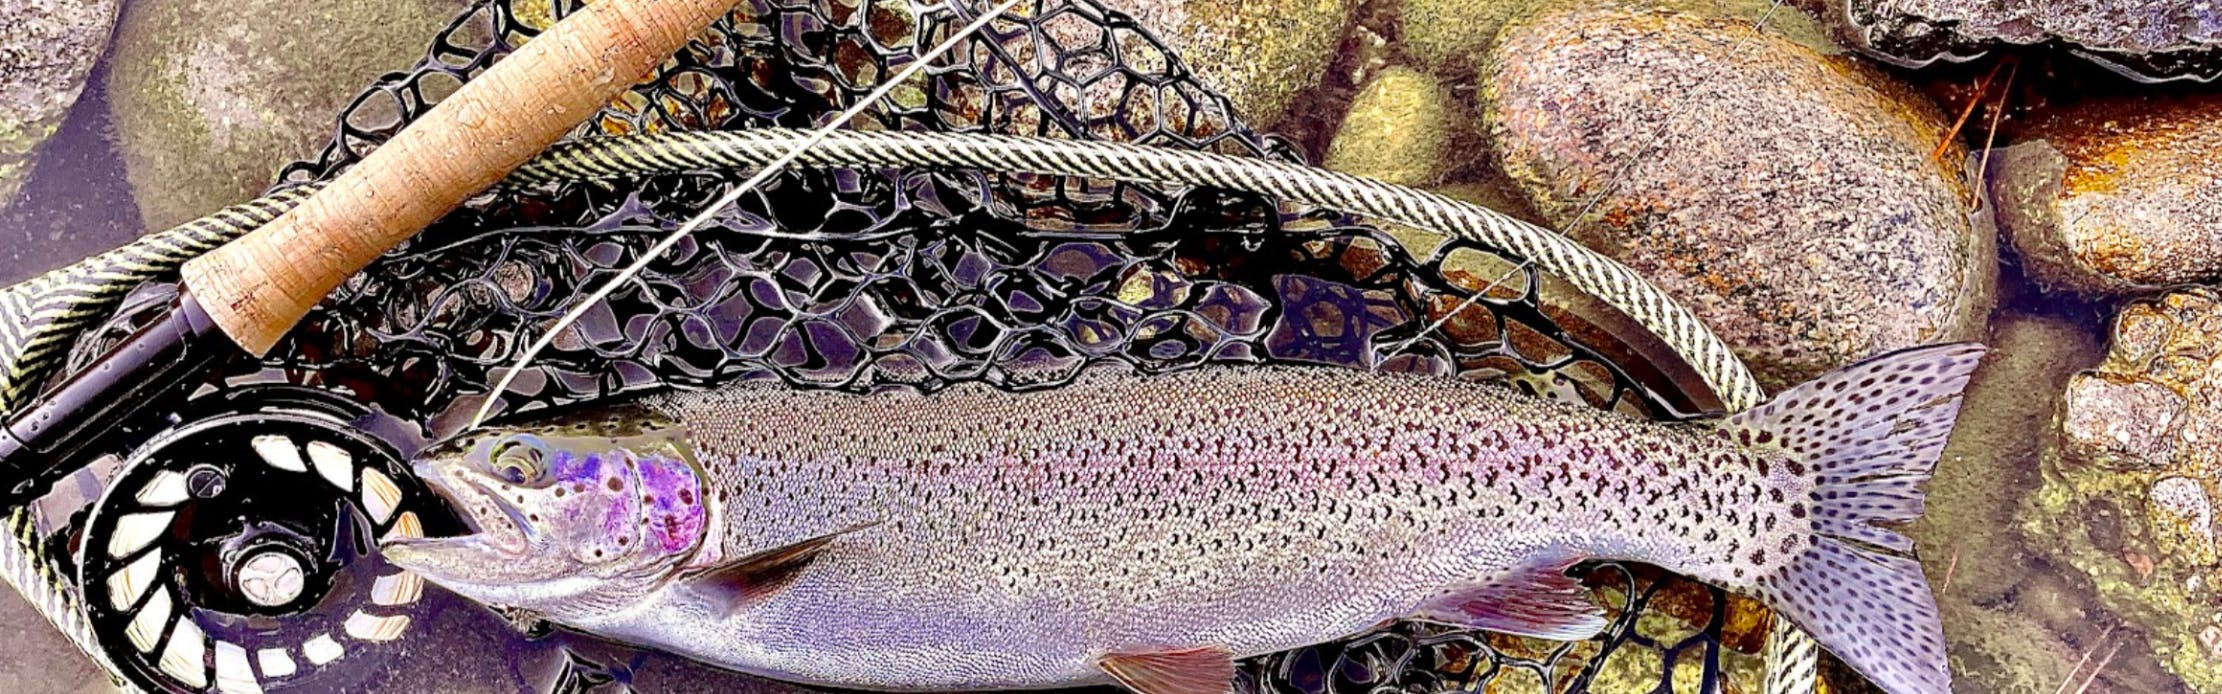 What Fly Fishing Gear Can You Save on, and What Should You Splurge